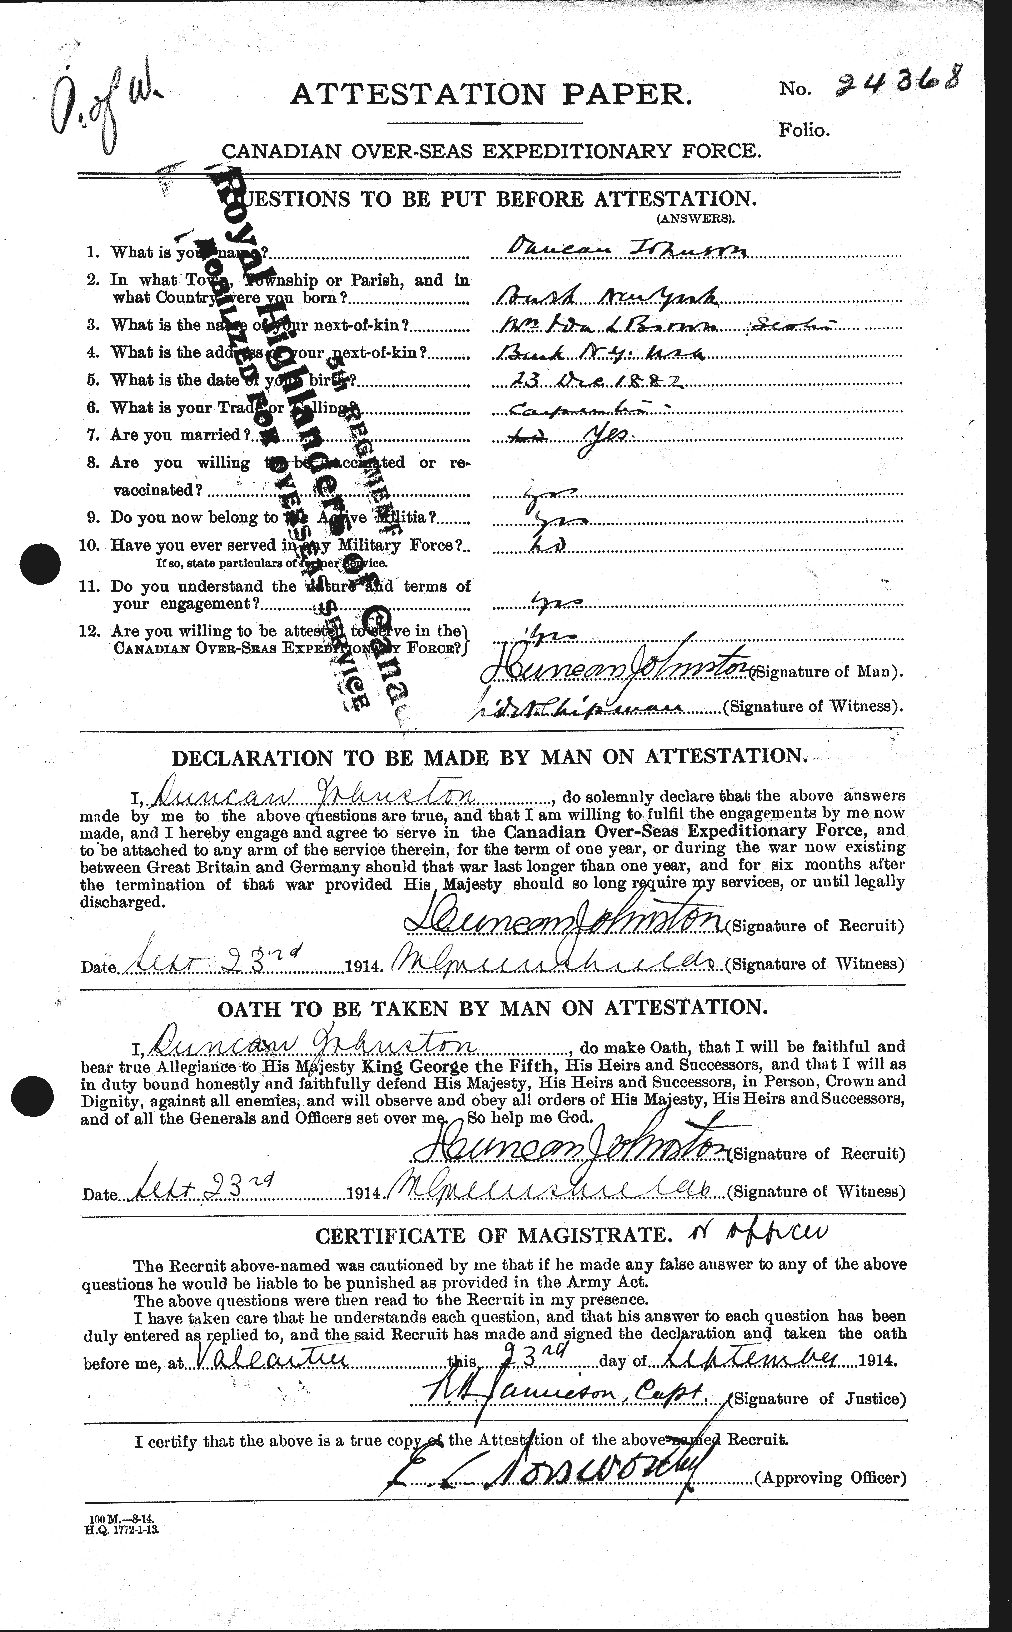 Personnel Records of the First World War - CEF 423187a